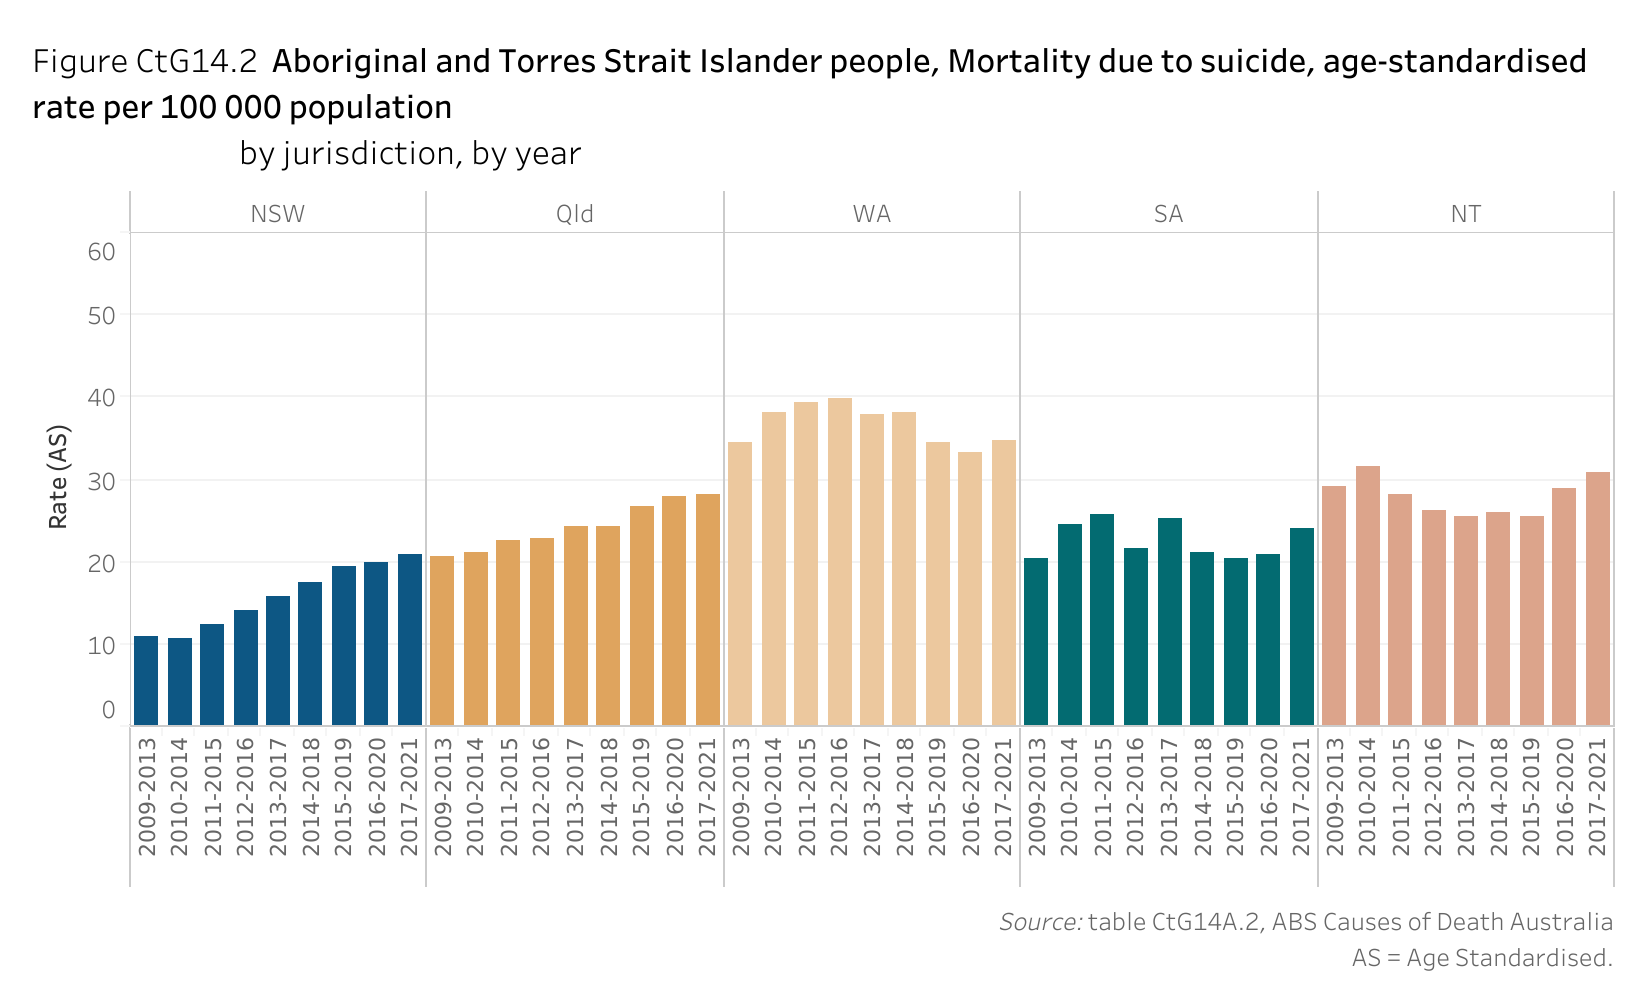 Figure CtG14.2 shows Aboriginal and Torres Strait Islander people, Mortality due to suicide, age-standardised rate per 100 000 population, by jurisdiction, by year. More details can be found within the text near this image.